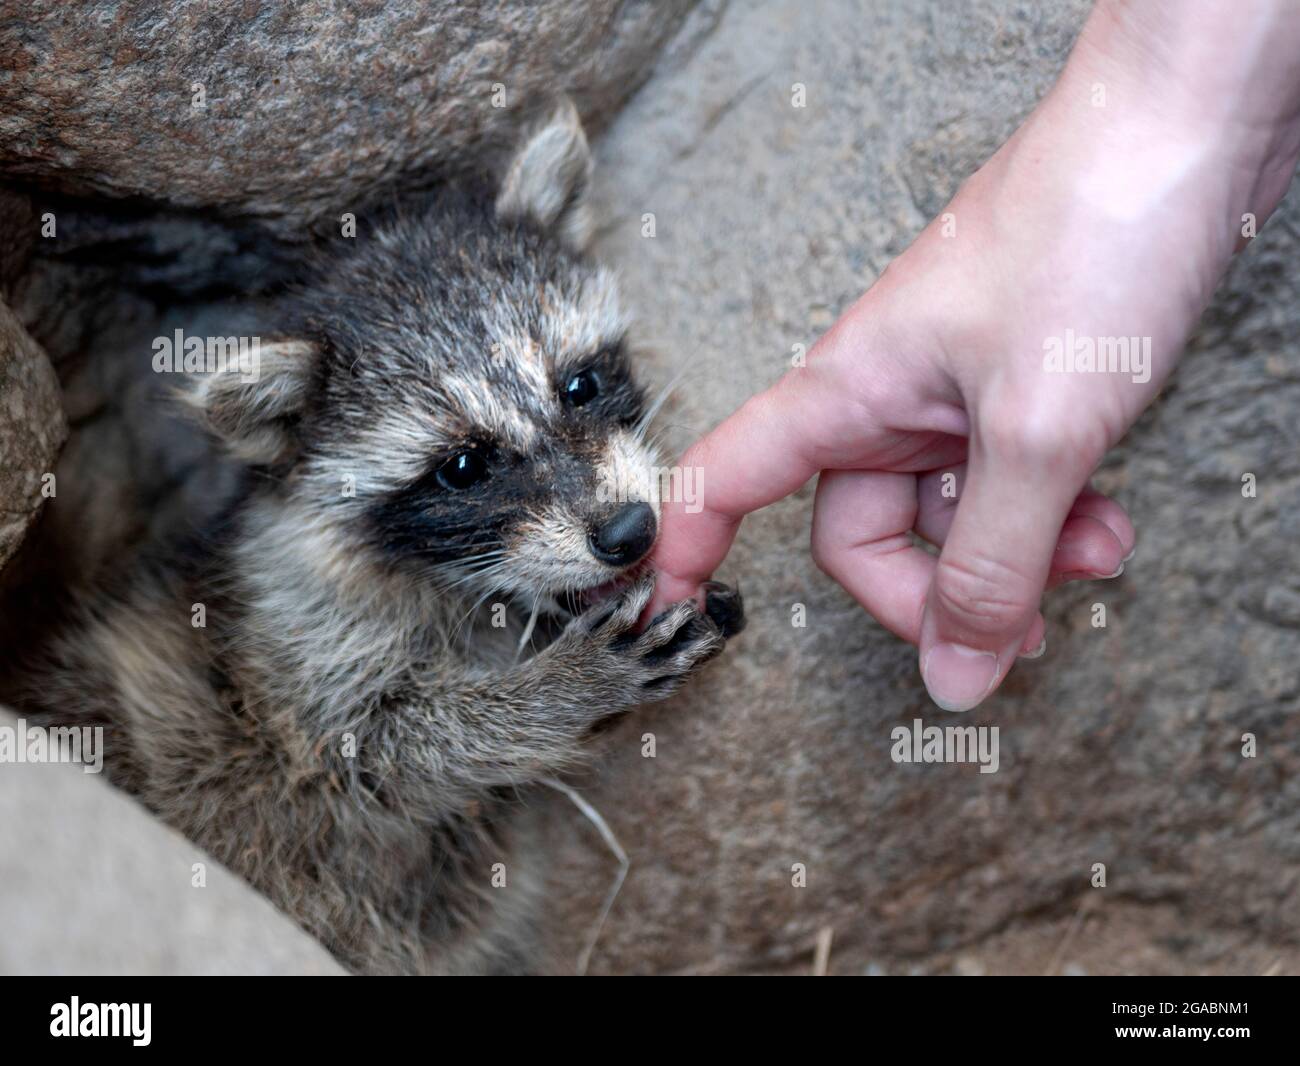 Common raccoon bites a human finger. Concept of human interactions with wild animals Stock Photo